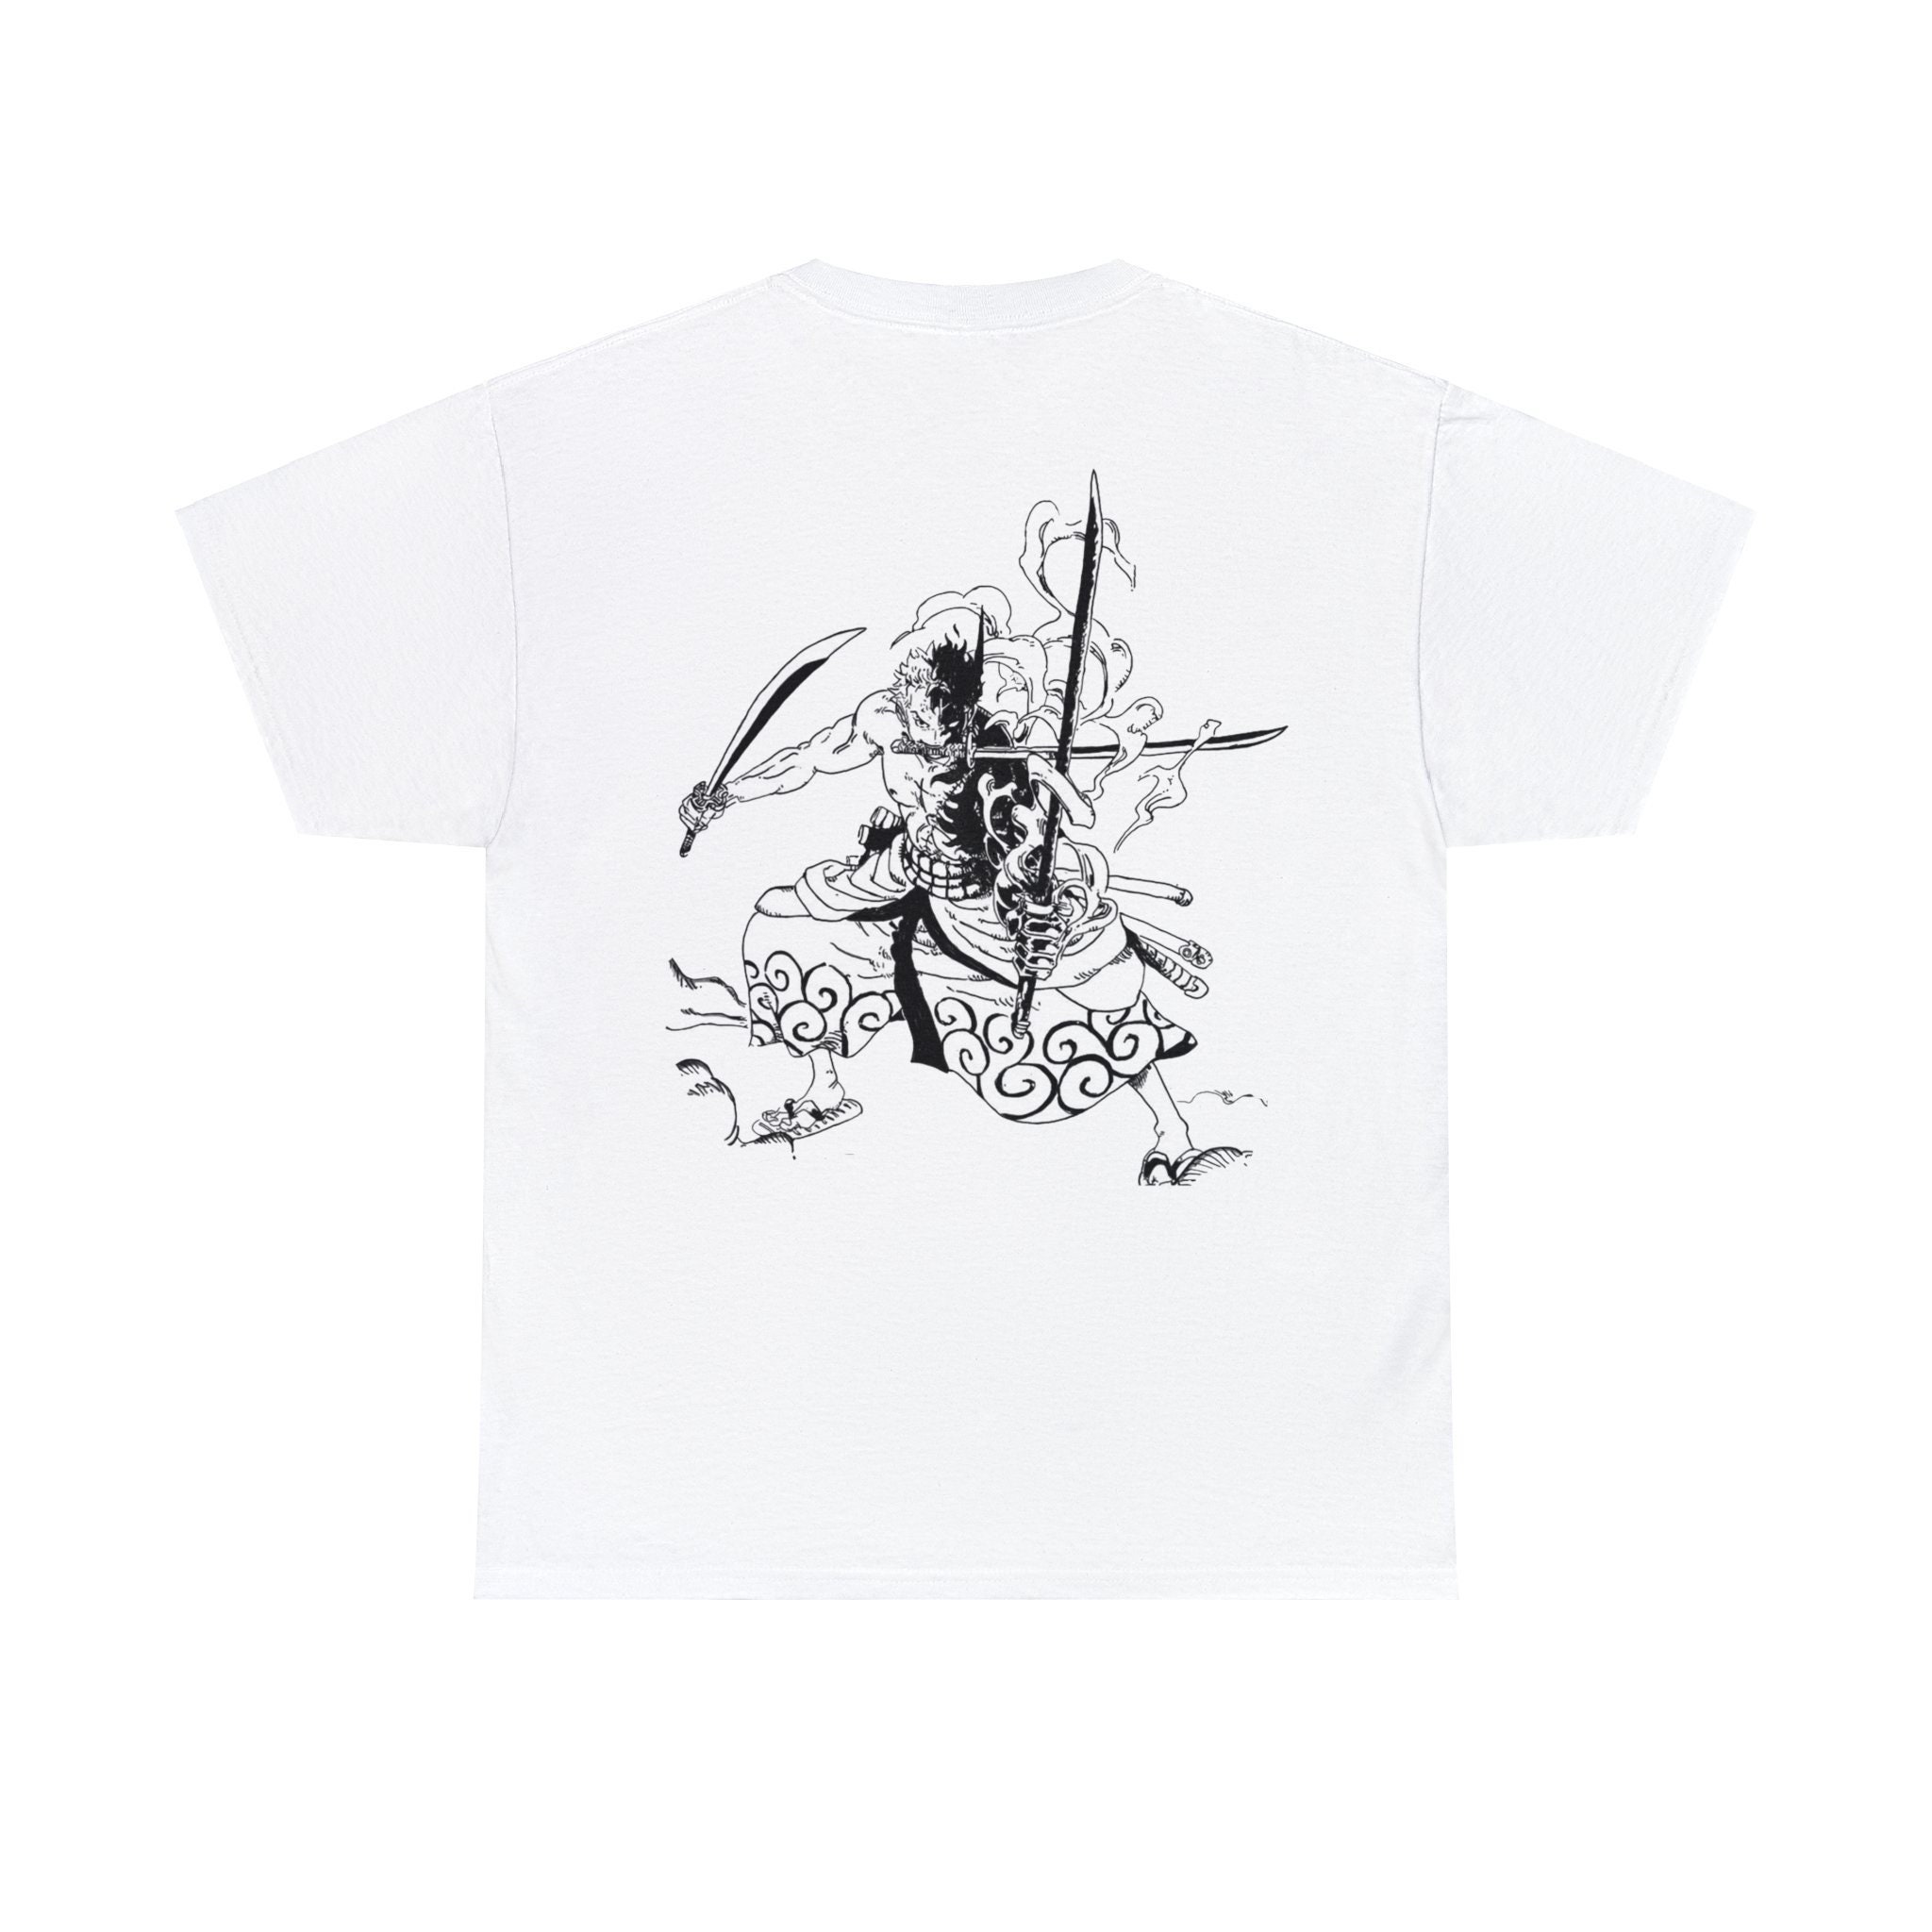 Zoro with enma Essential T-Shirt for Sale by TimothyEstes